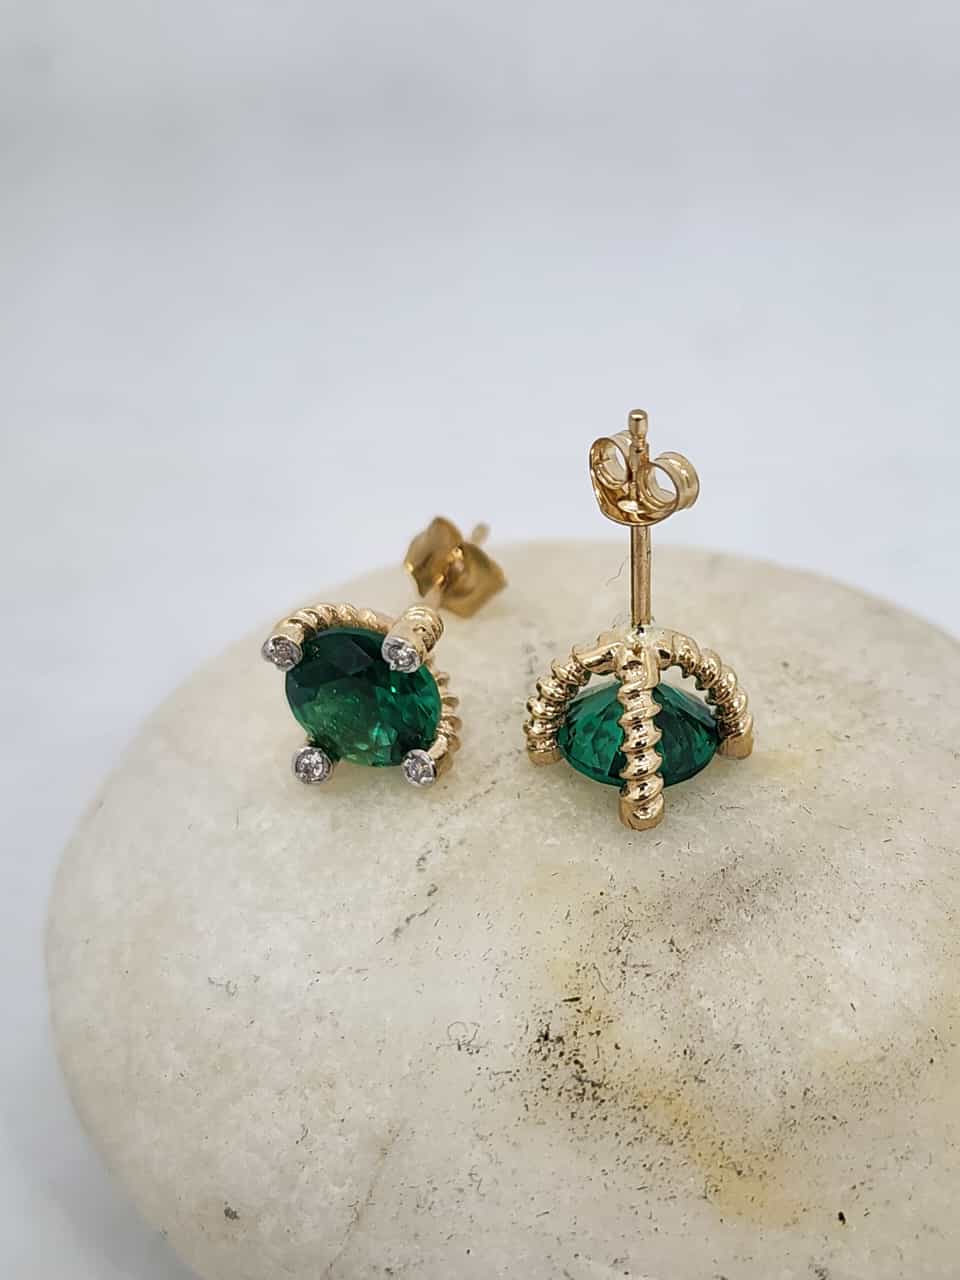 14k Gold Earrings with 2 EMERALD and 8 DIAMONDS VS1, "STT: Prong"